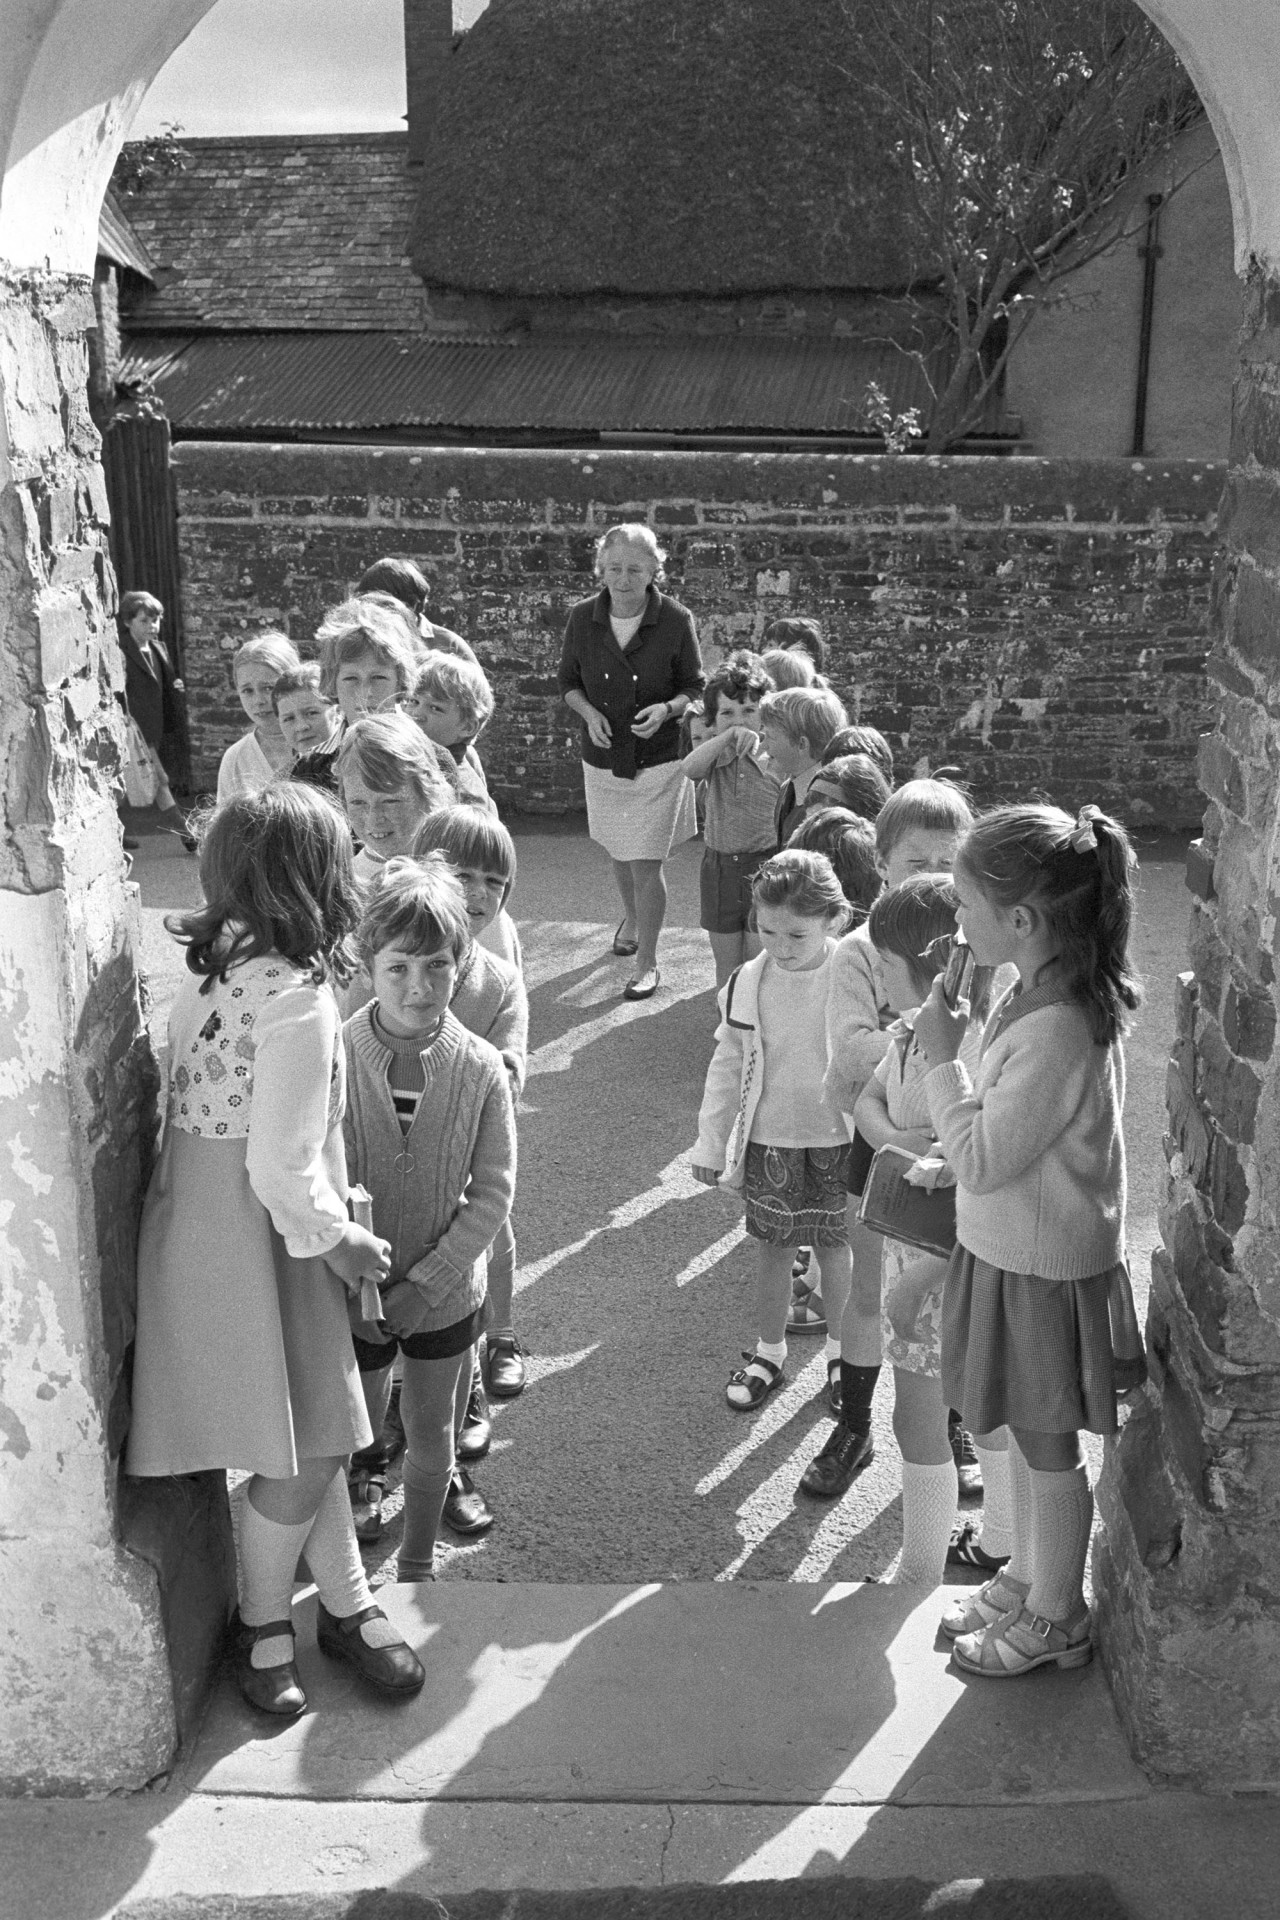 Primary School children lining up in yard before going in to school. 
[Schoolchildren lining up in the playground, waiting to go into Dolton Primary School. Mrs Gough, a teacher, is walking between the lines of children.]